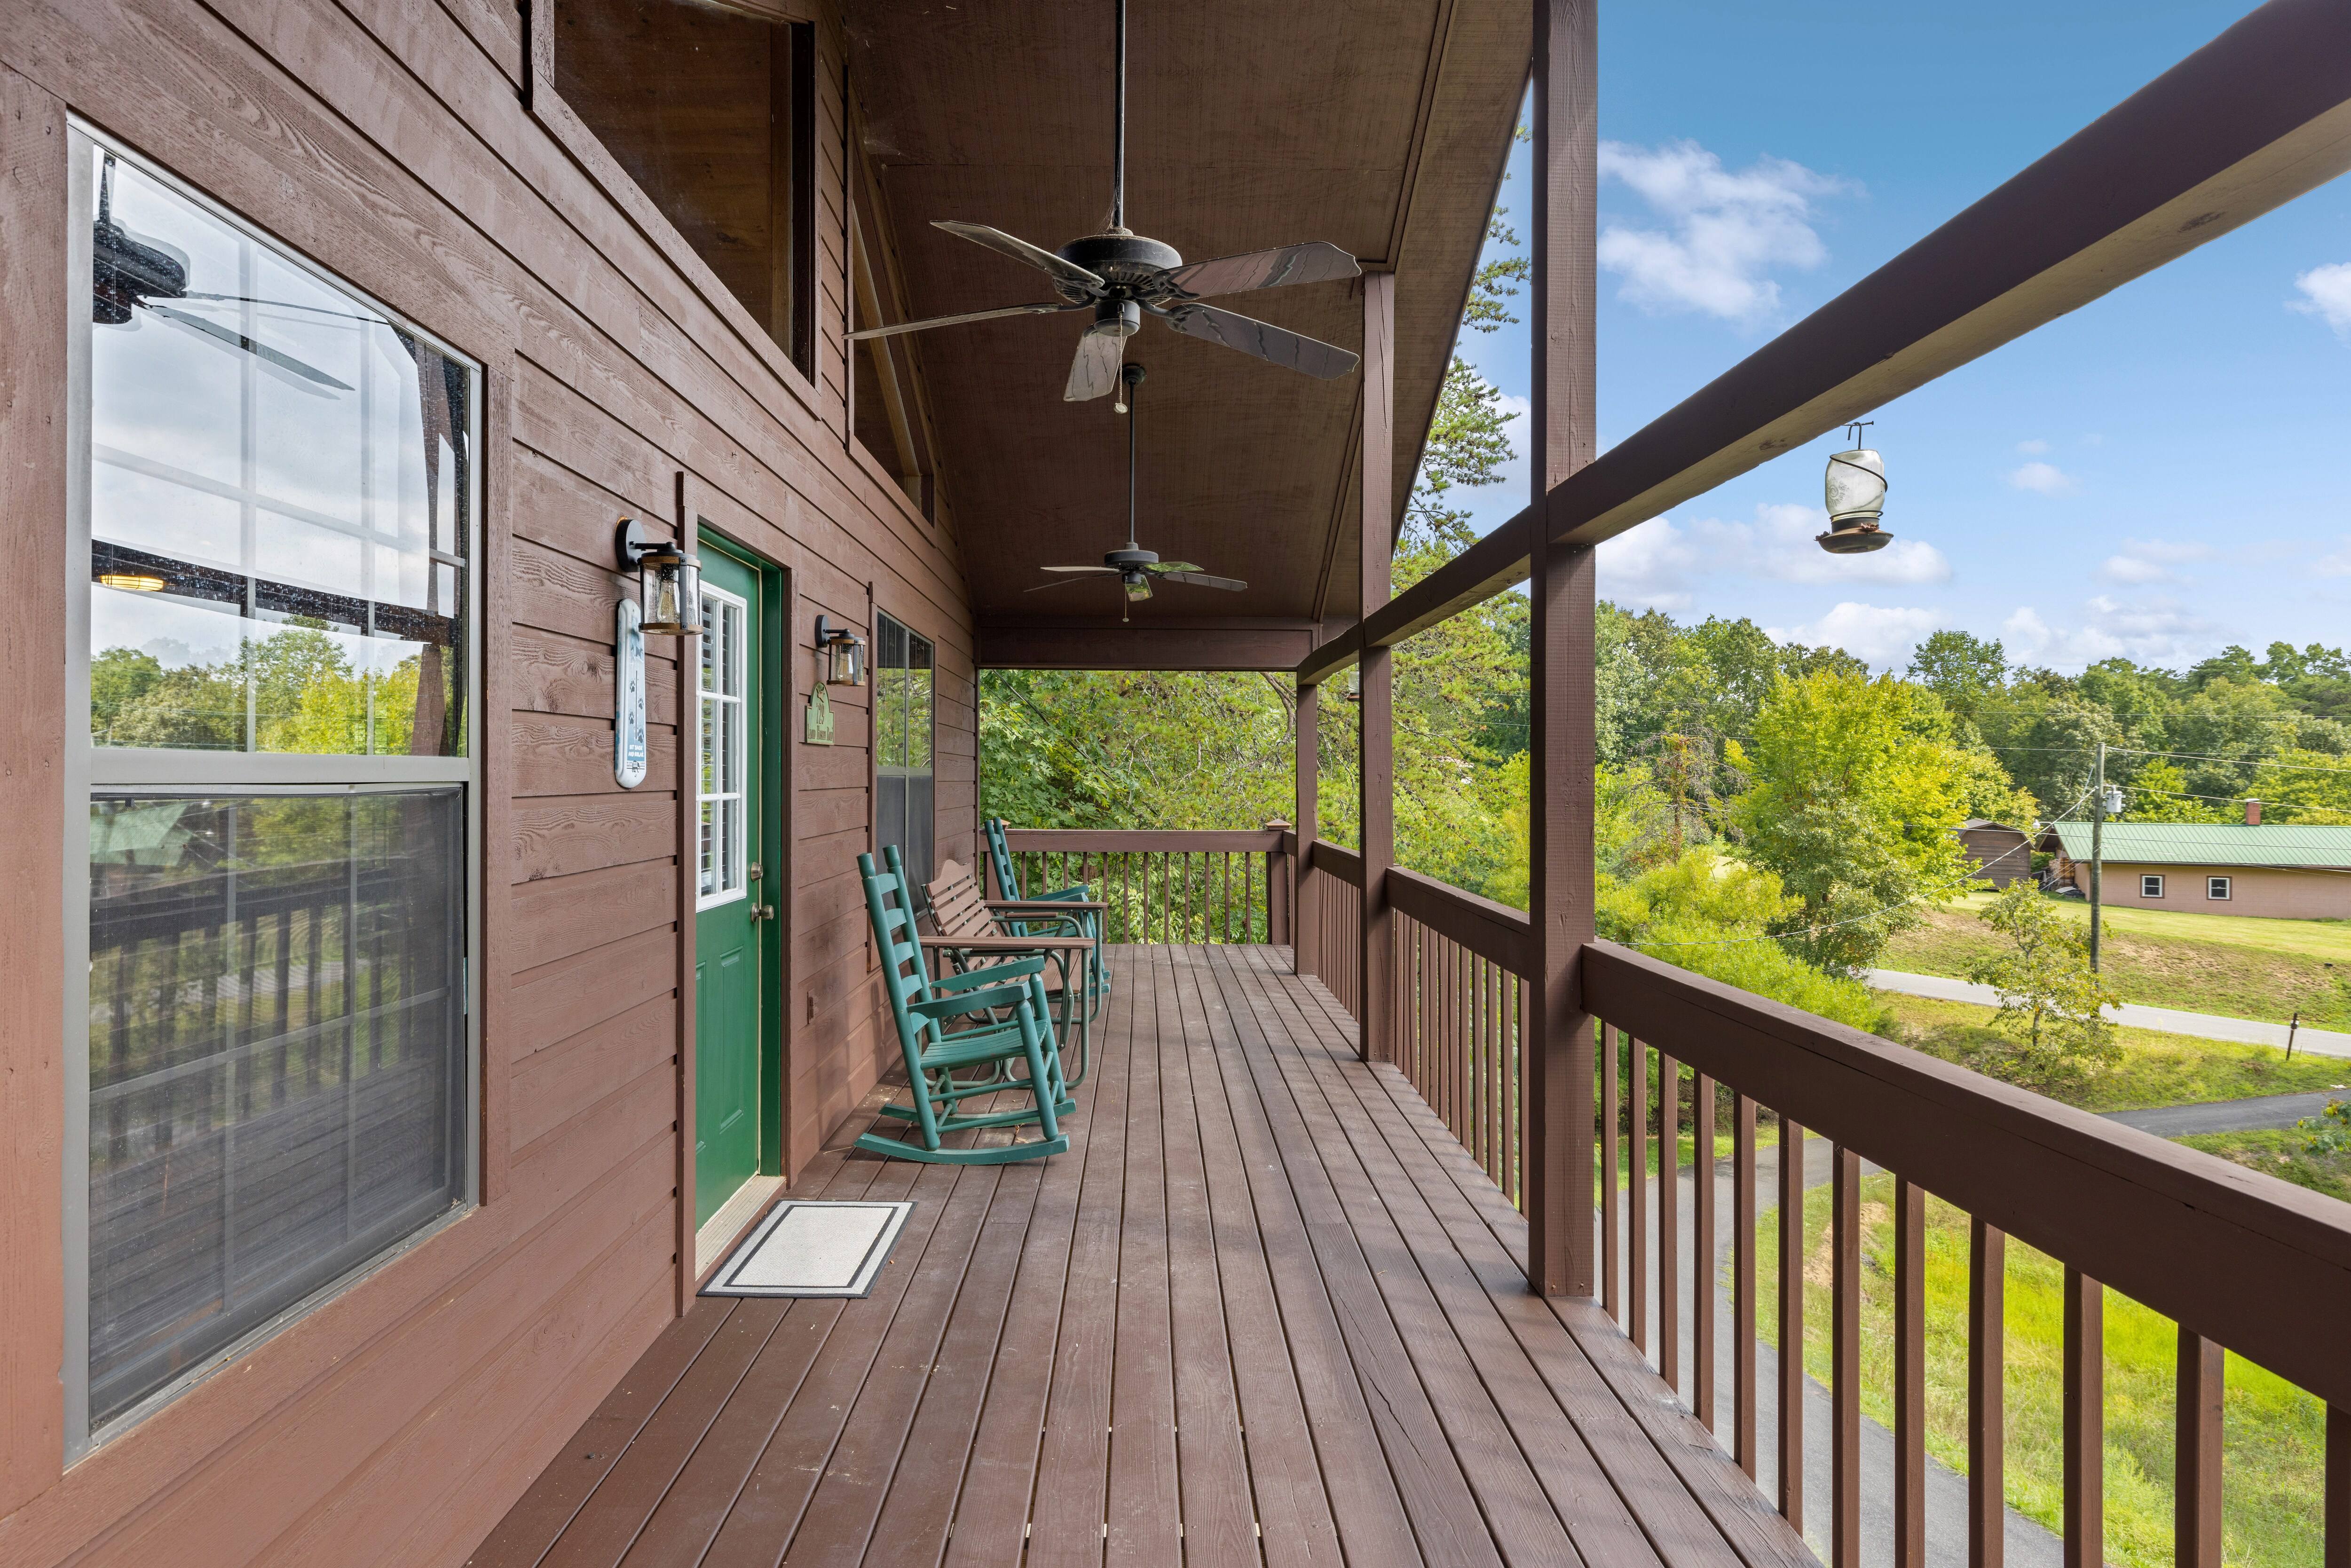 Property Image 2 - Pigeon Delight is a 2 Bedroom Cabin - 6 miles from Dollywood! Hot Tub, Fire Pit, Arcade, Pool Table!